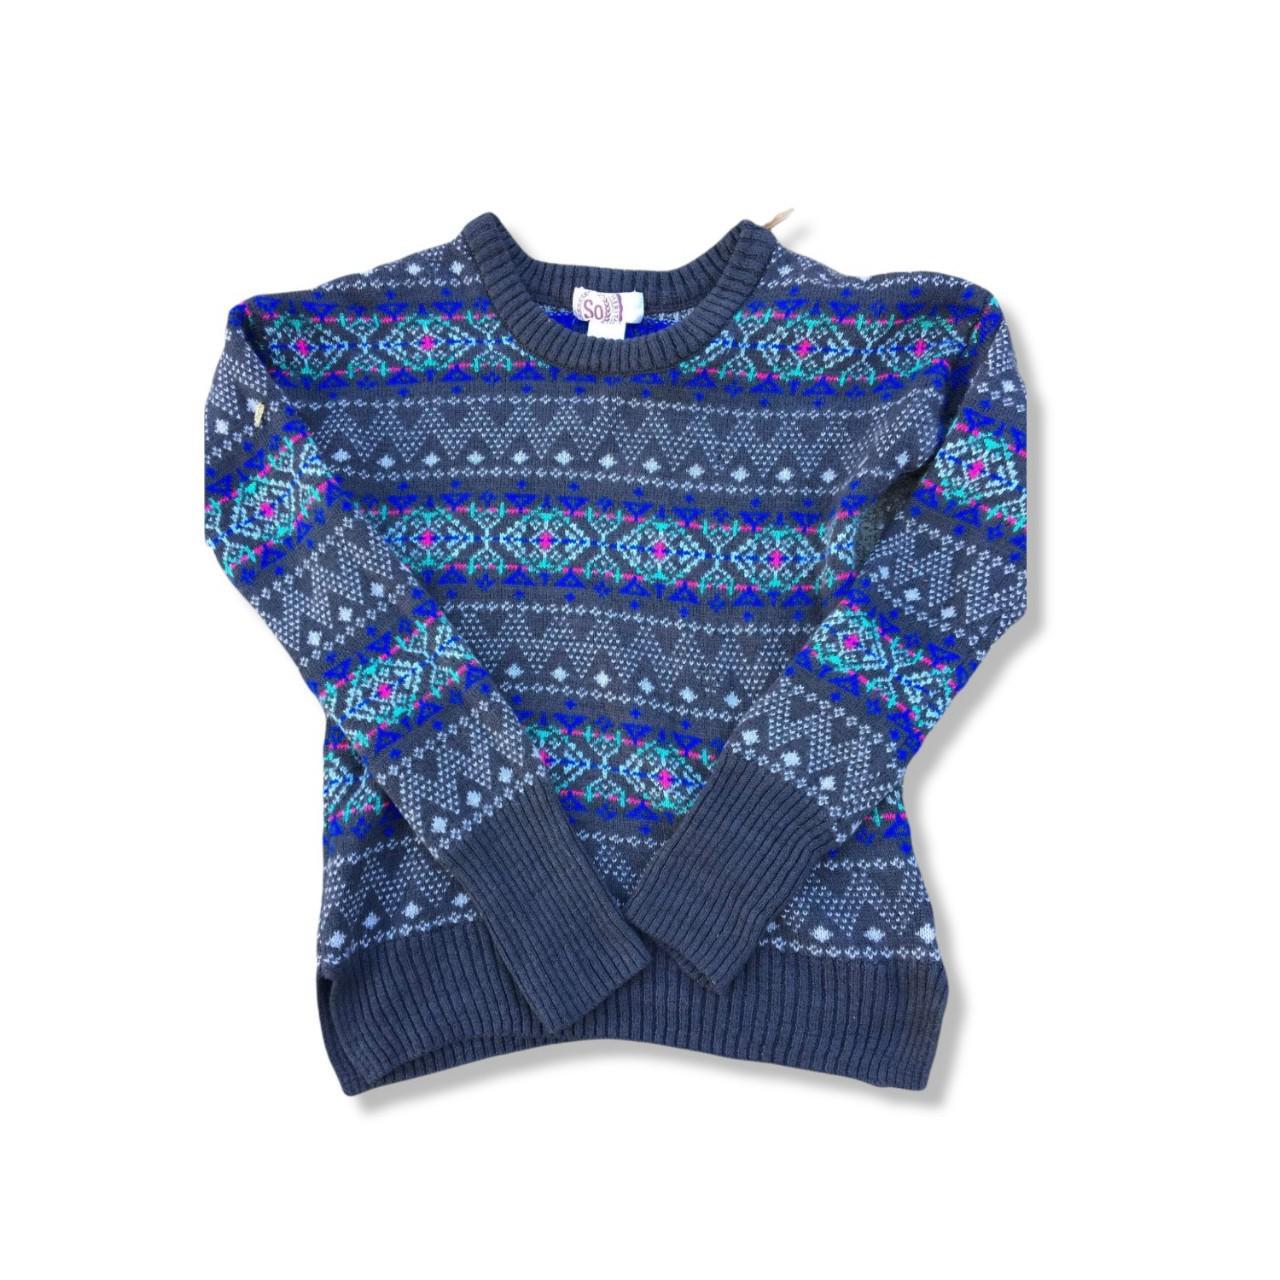 Product Image 1 - Such an adorable Christmas sweater